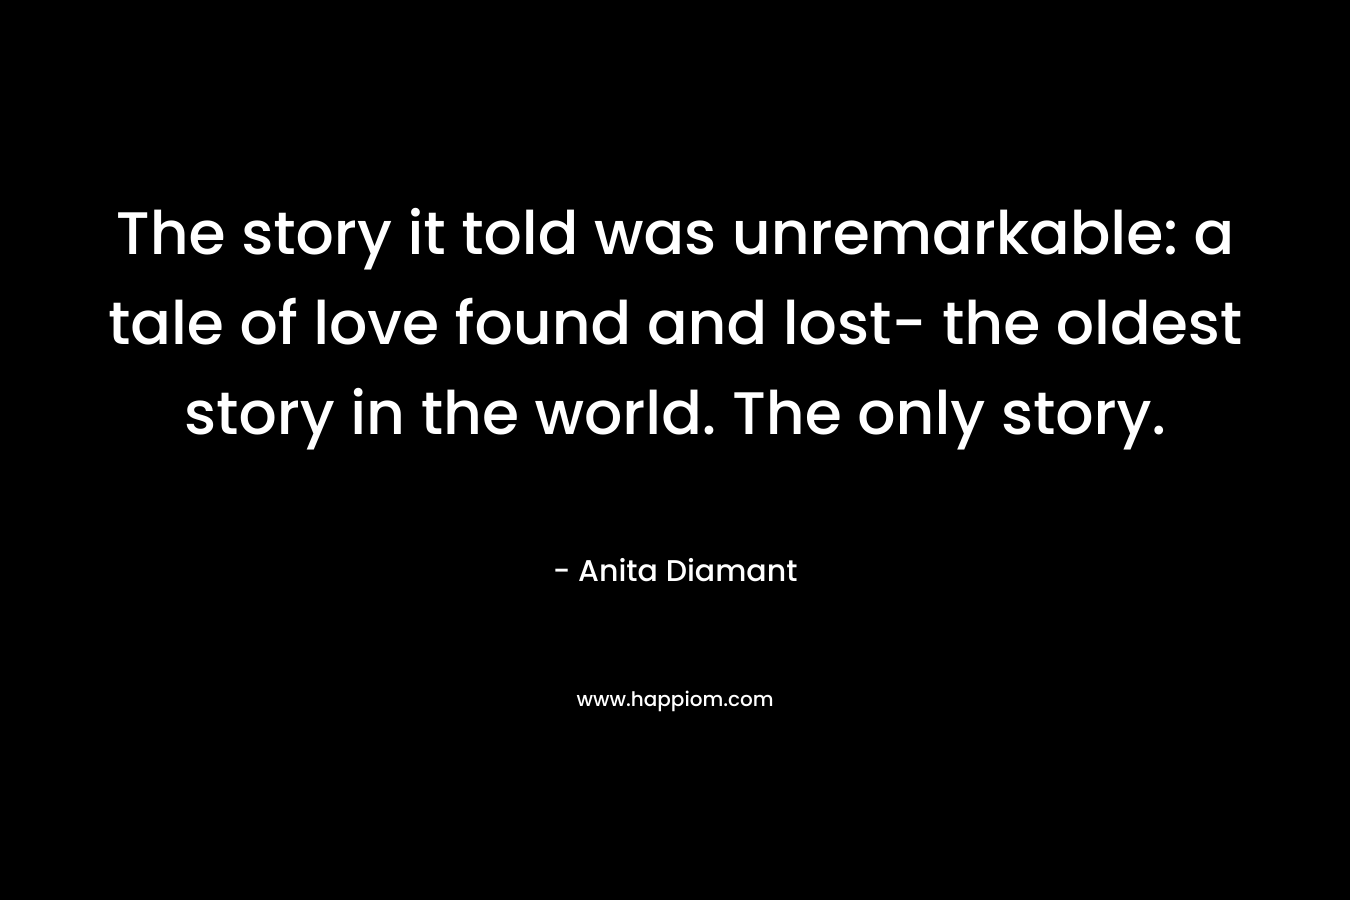 The story it told was unremarkable: a tale of love found and lost- the oldest story in the world. The only story.